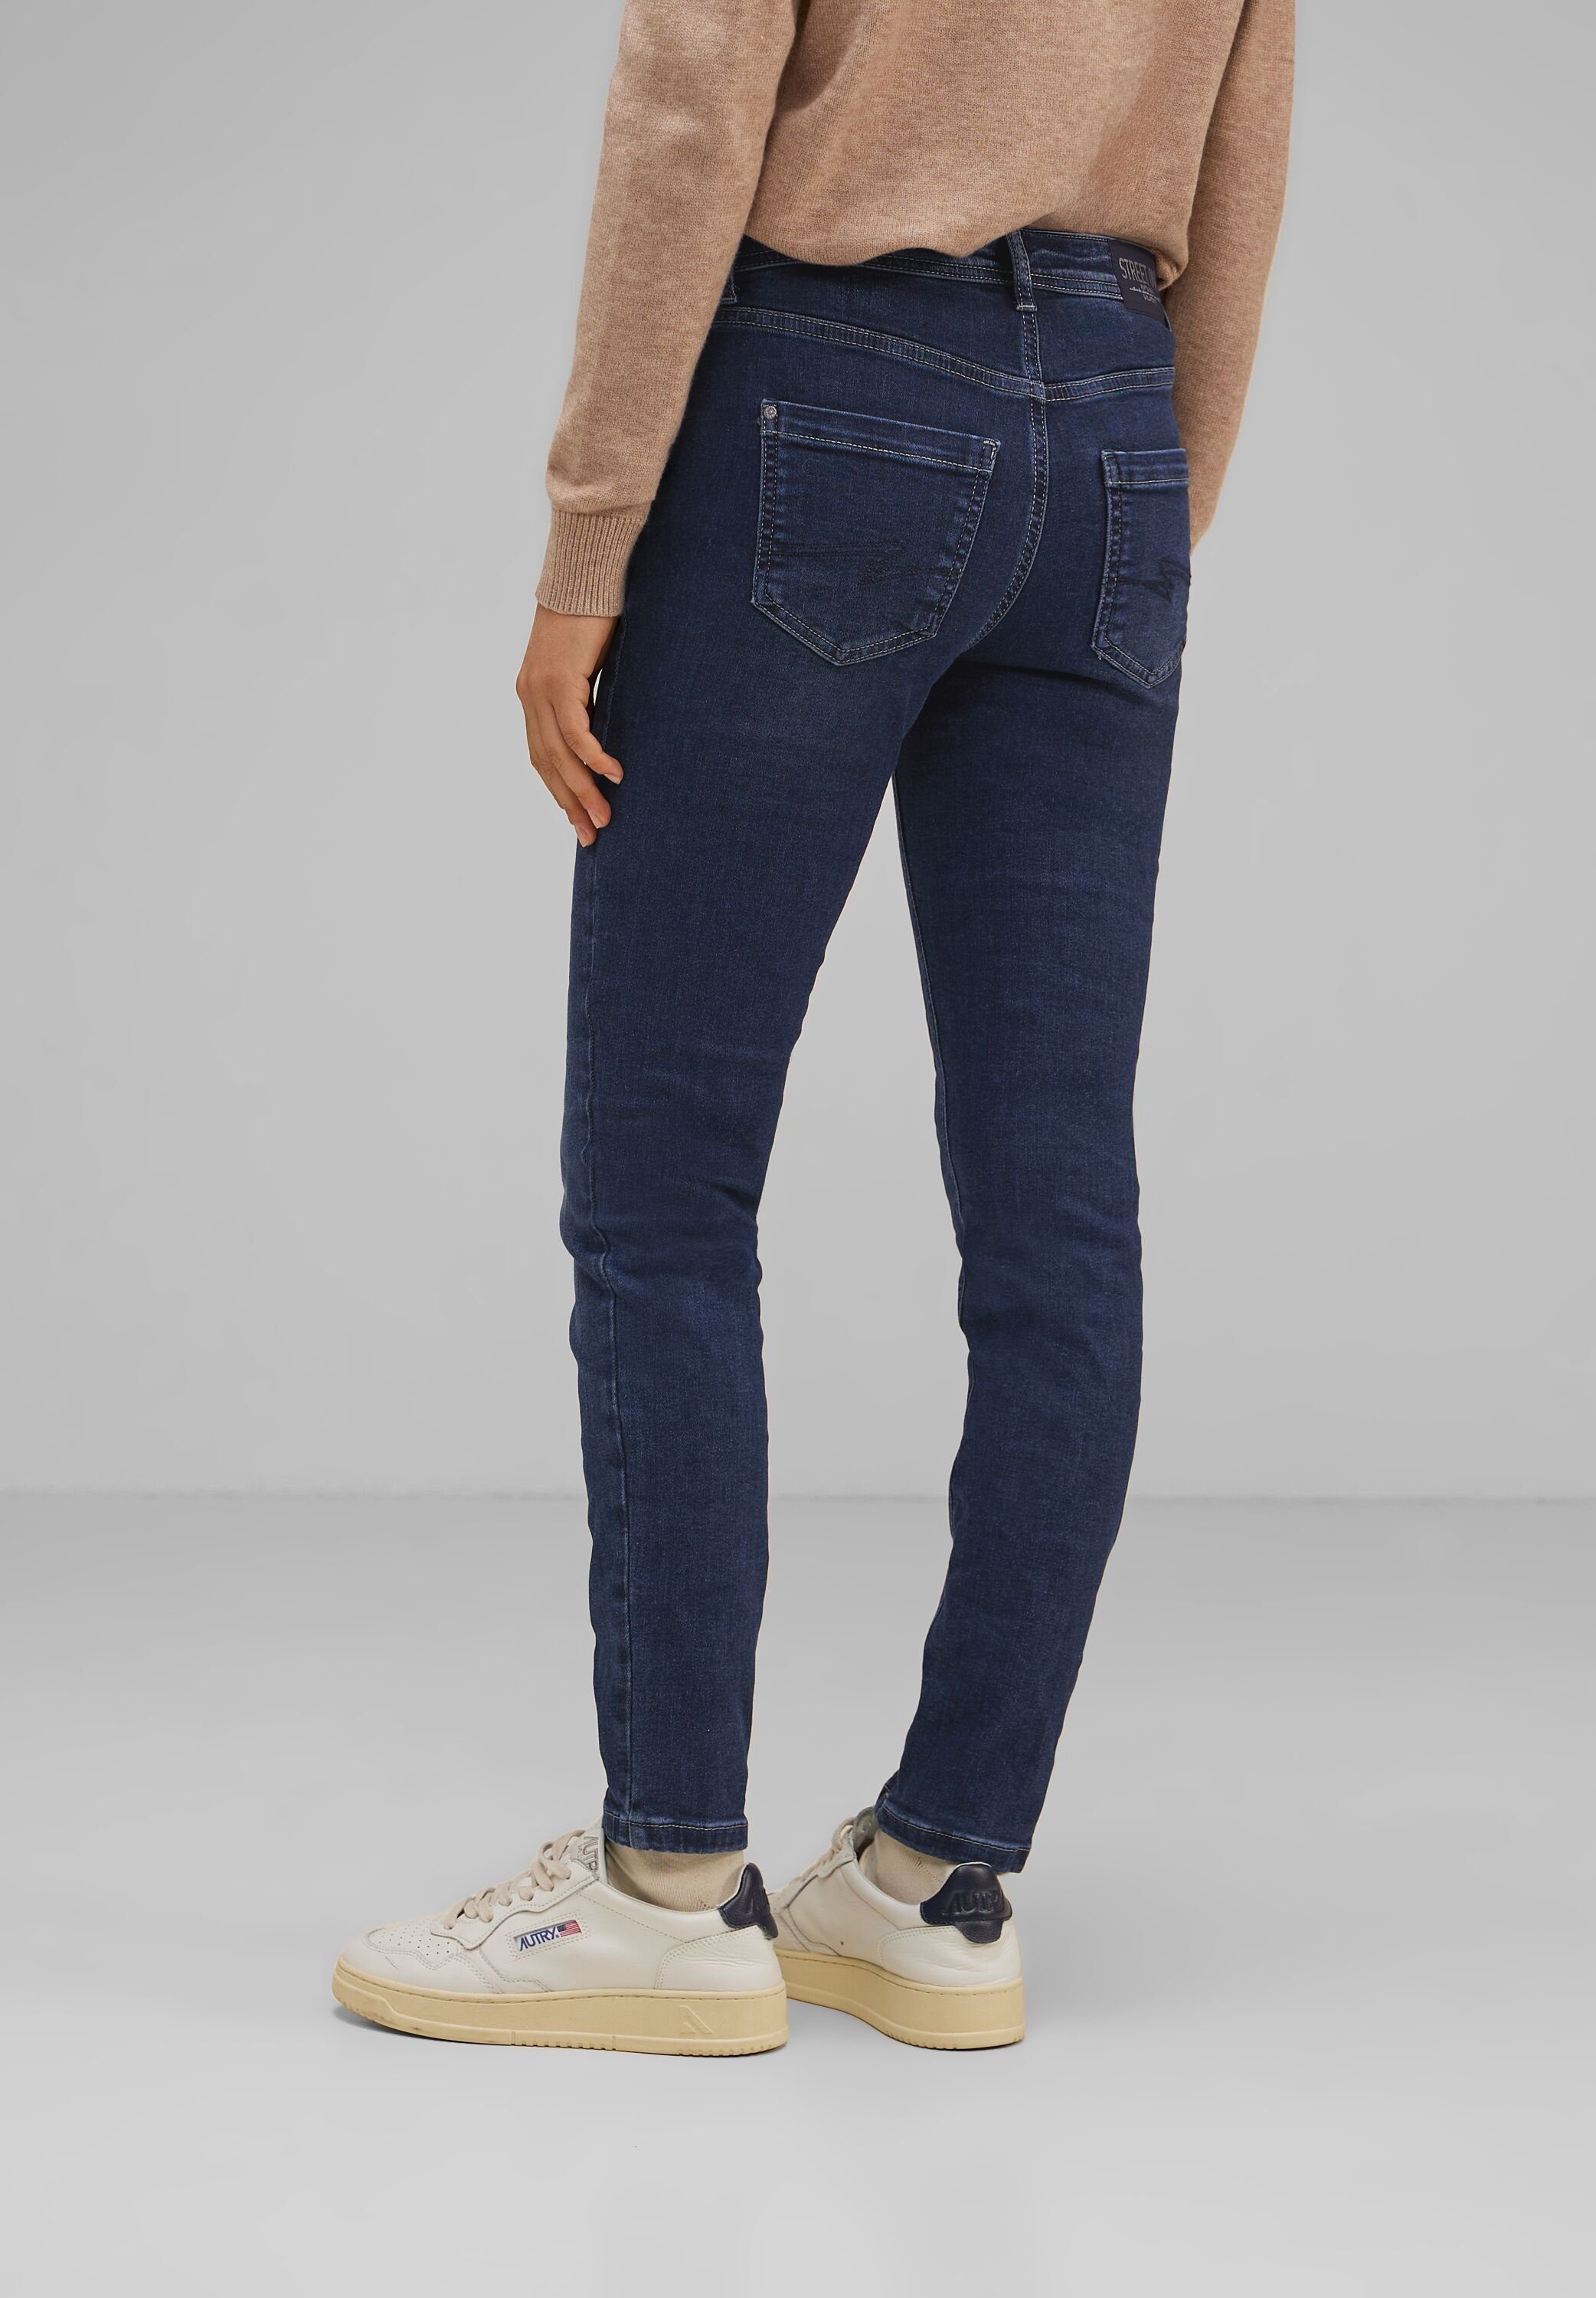 STREET ONE Slim-fit-Jeans softer Materialmix | Slim-Fit Jeans